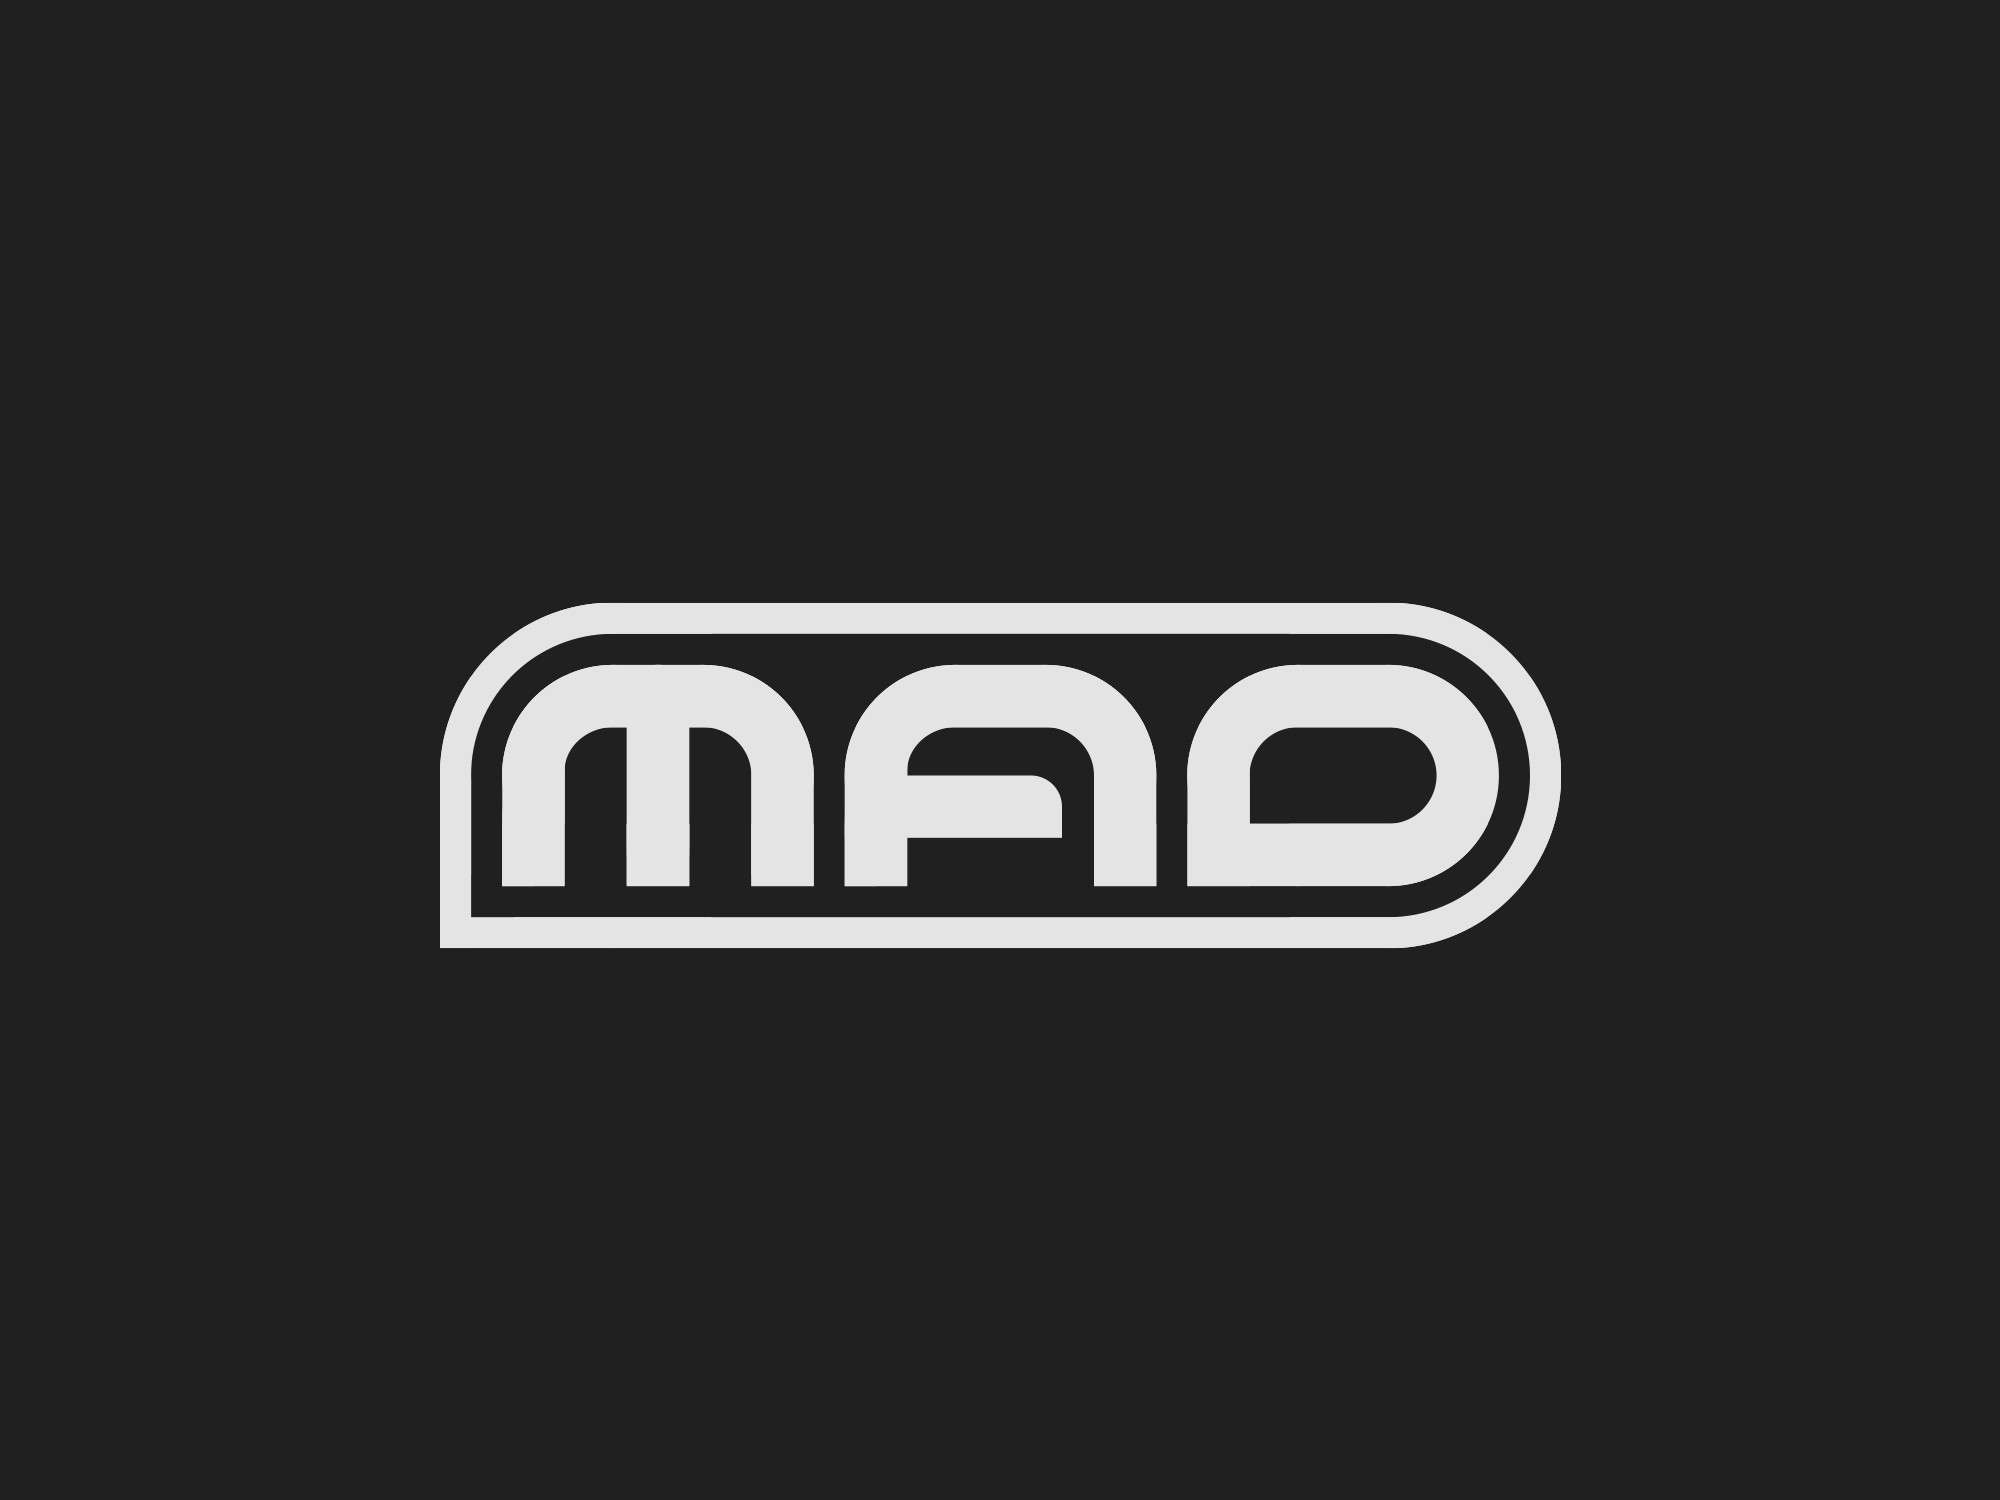 File:Logo Mad Sin.png - Wikimedia Commons